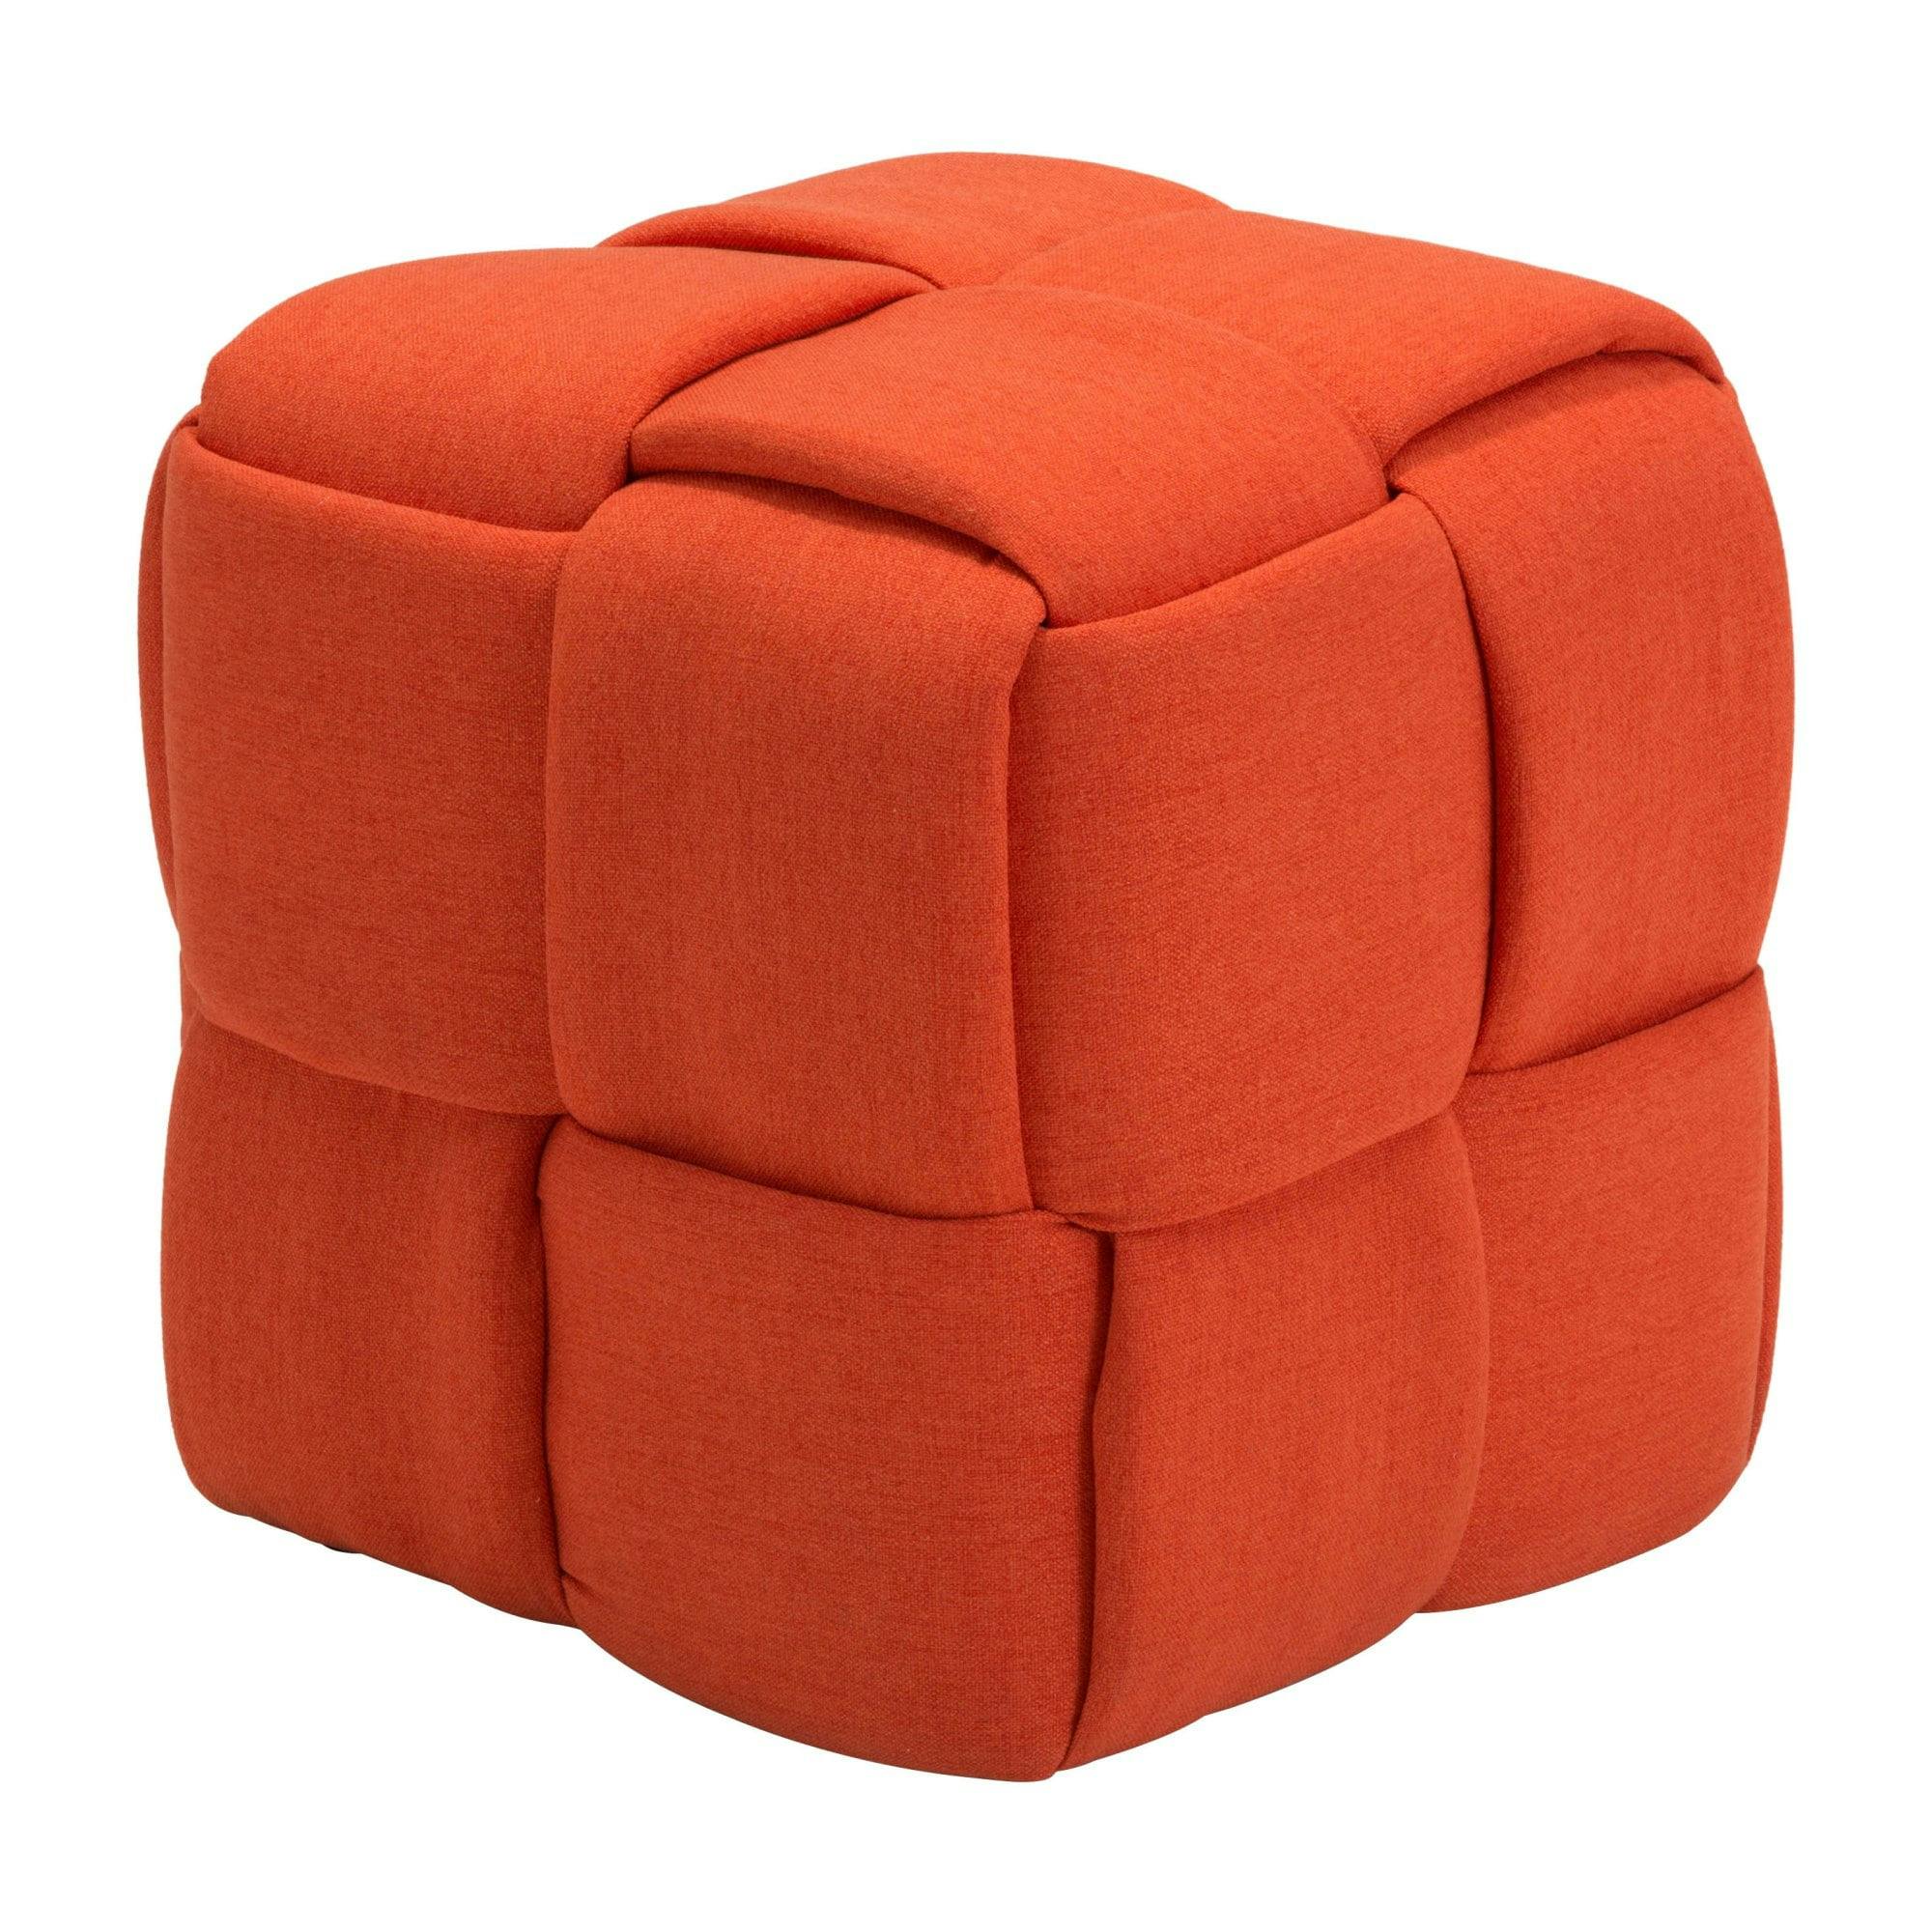 Modern Checks 19.7" Cube Stool in Vibrant Orange with Woven Polyester